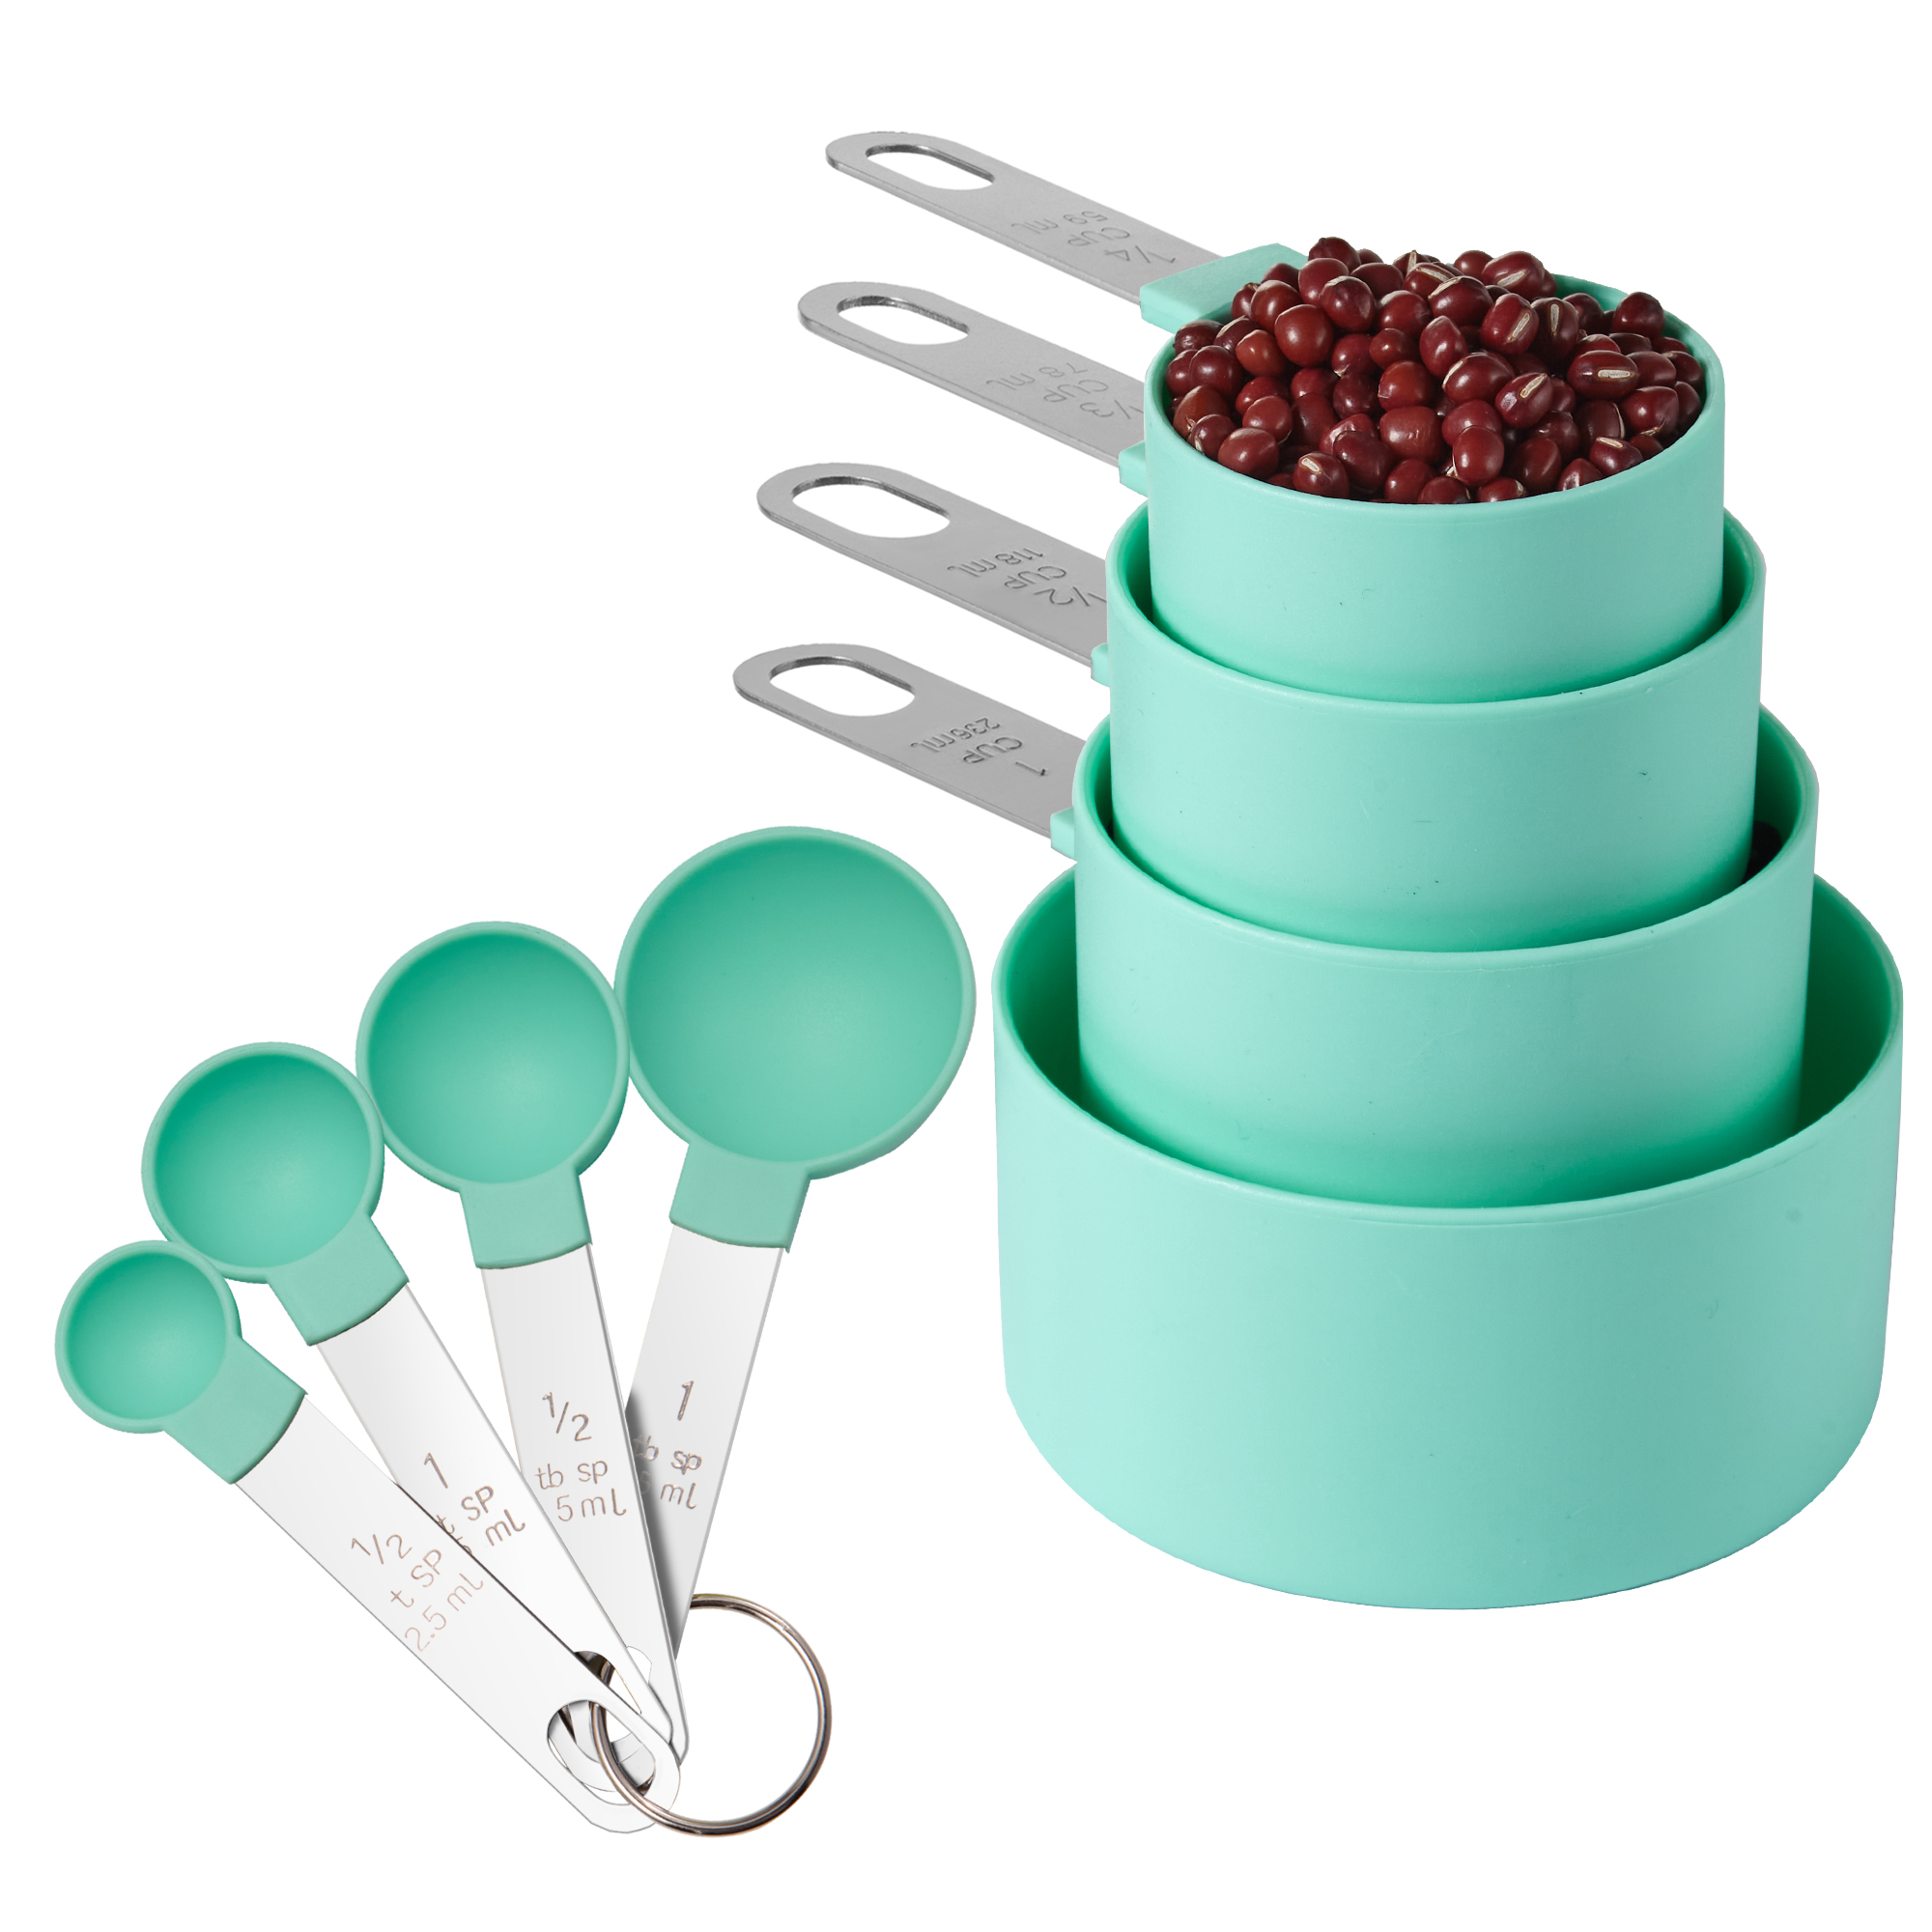 Measuring Cups And Spoons 8-piece Set Plastic Accurate Measuring